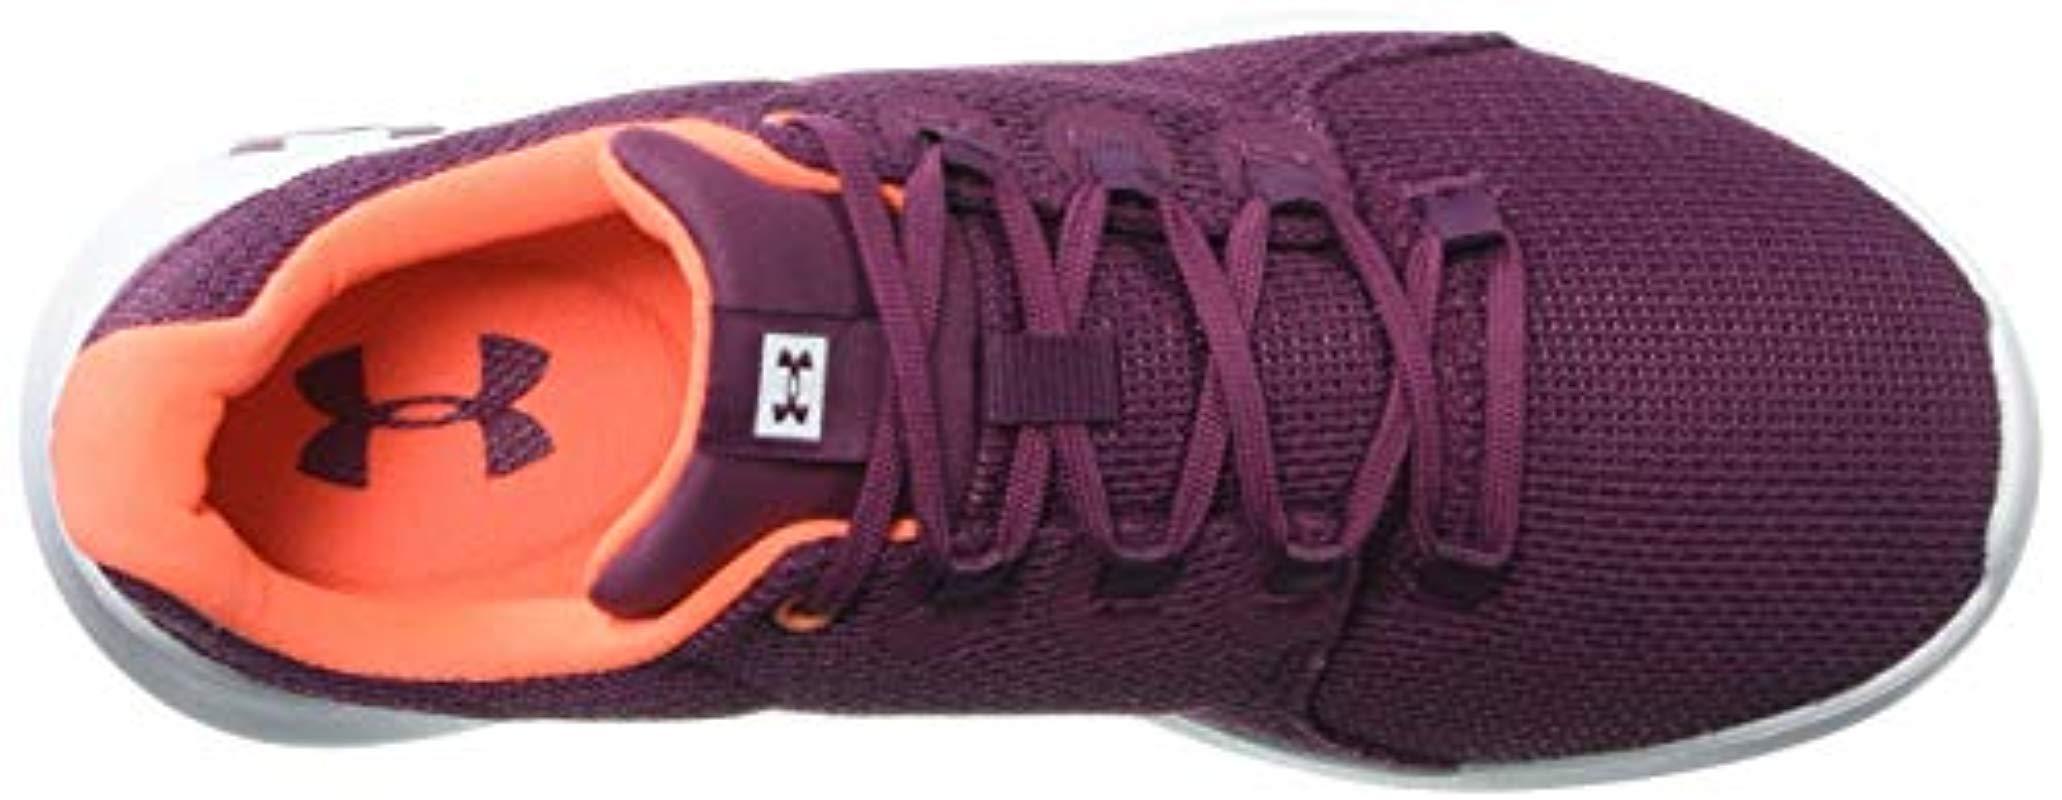 Under Armour Ripple 2.0 Sneaker in Purple - Save 34% | Lyst